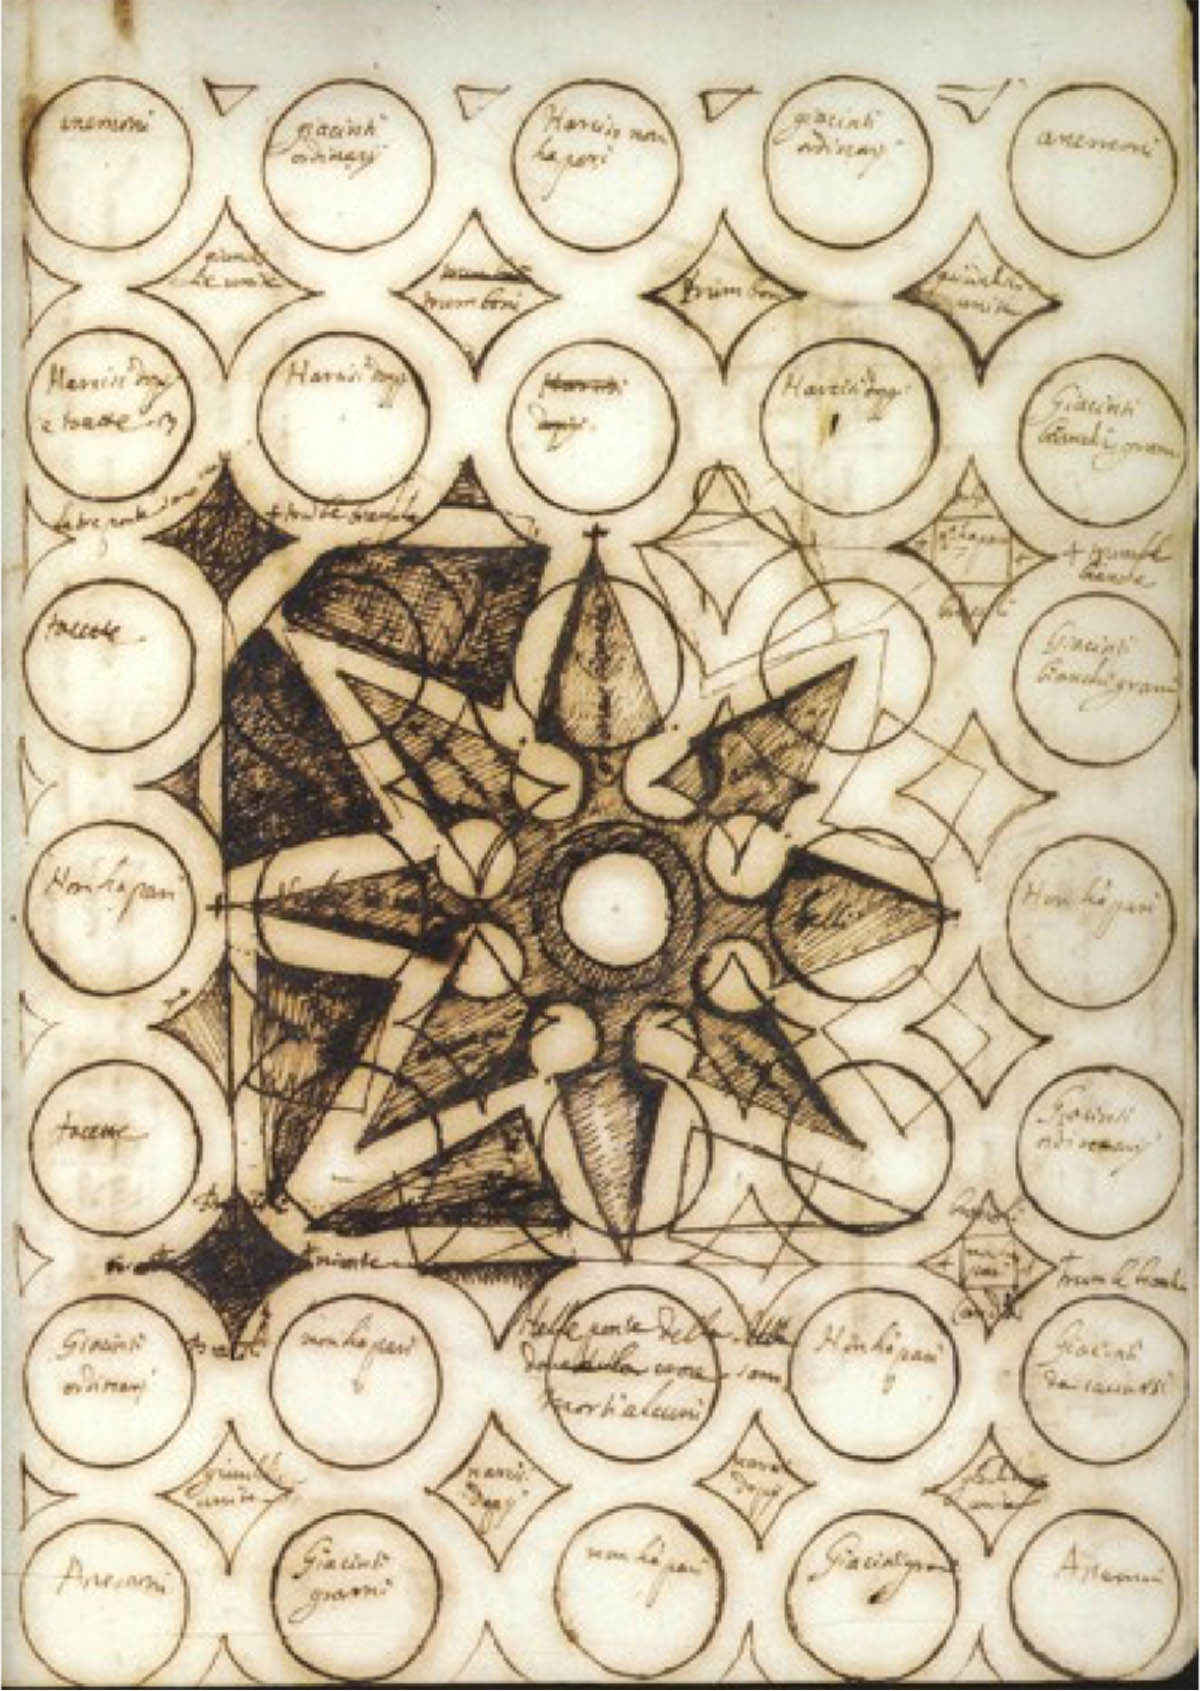 Sepia-colored plan for a garden, with many circles and a star-shaped center.